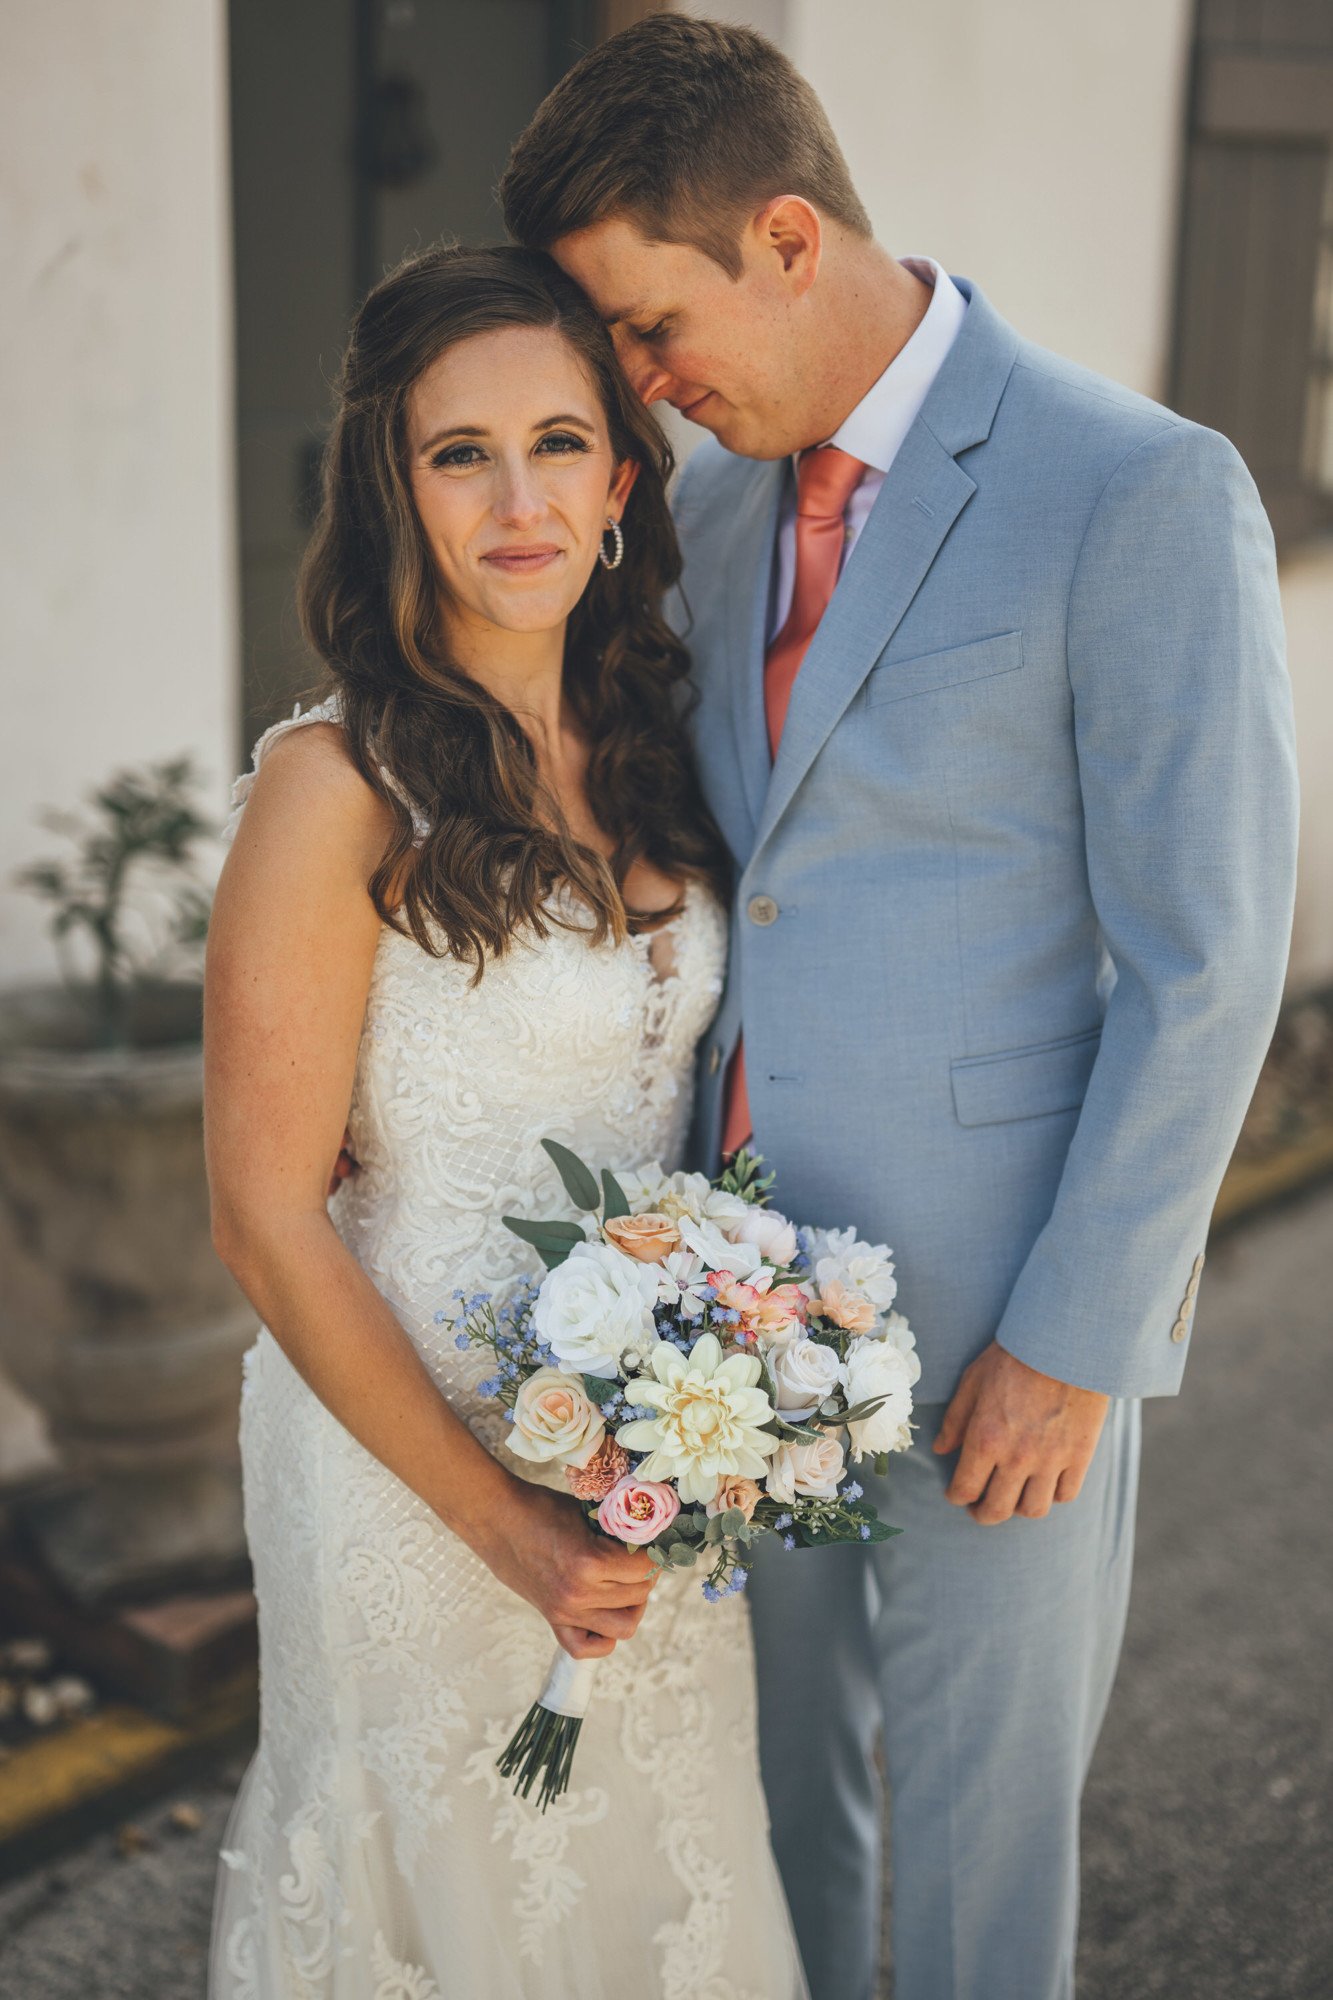 Bow Tie Photo & Video couple's bridal portraits outside of the white room in st. augustine, fl.jpg